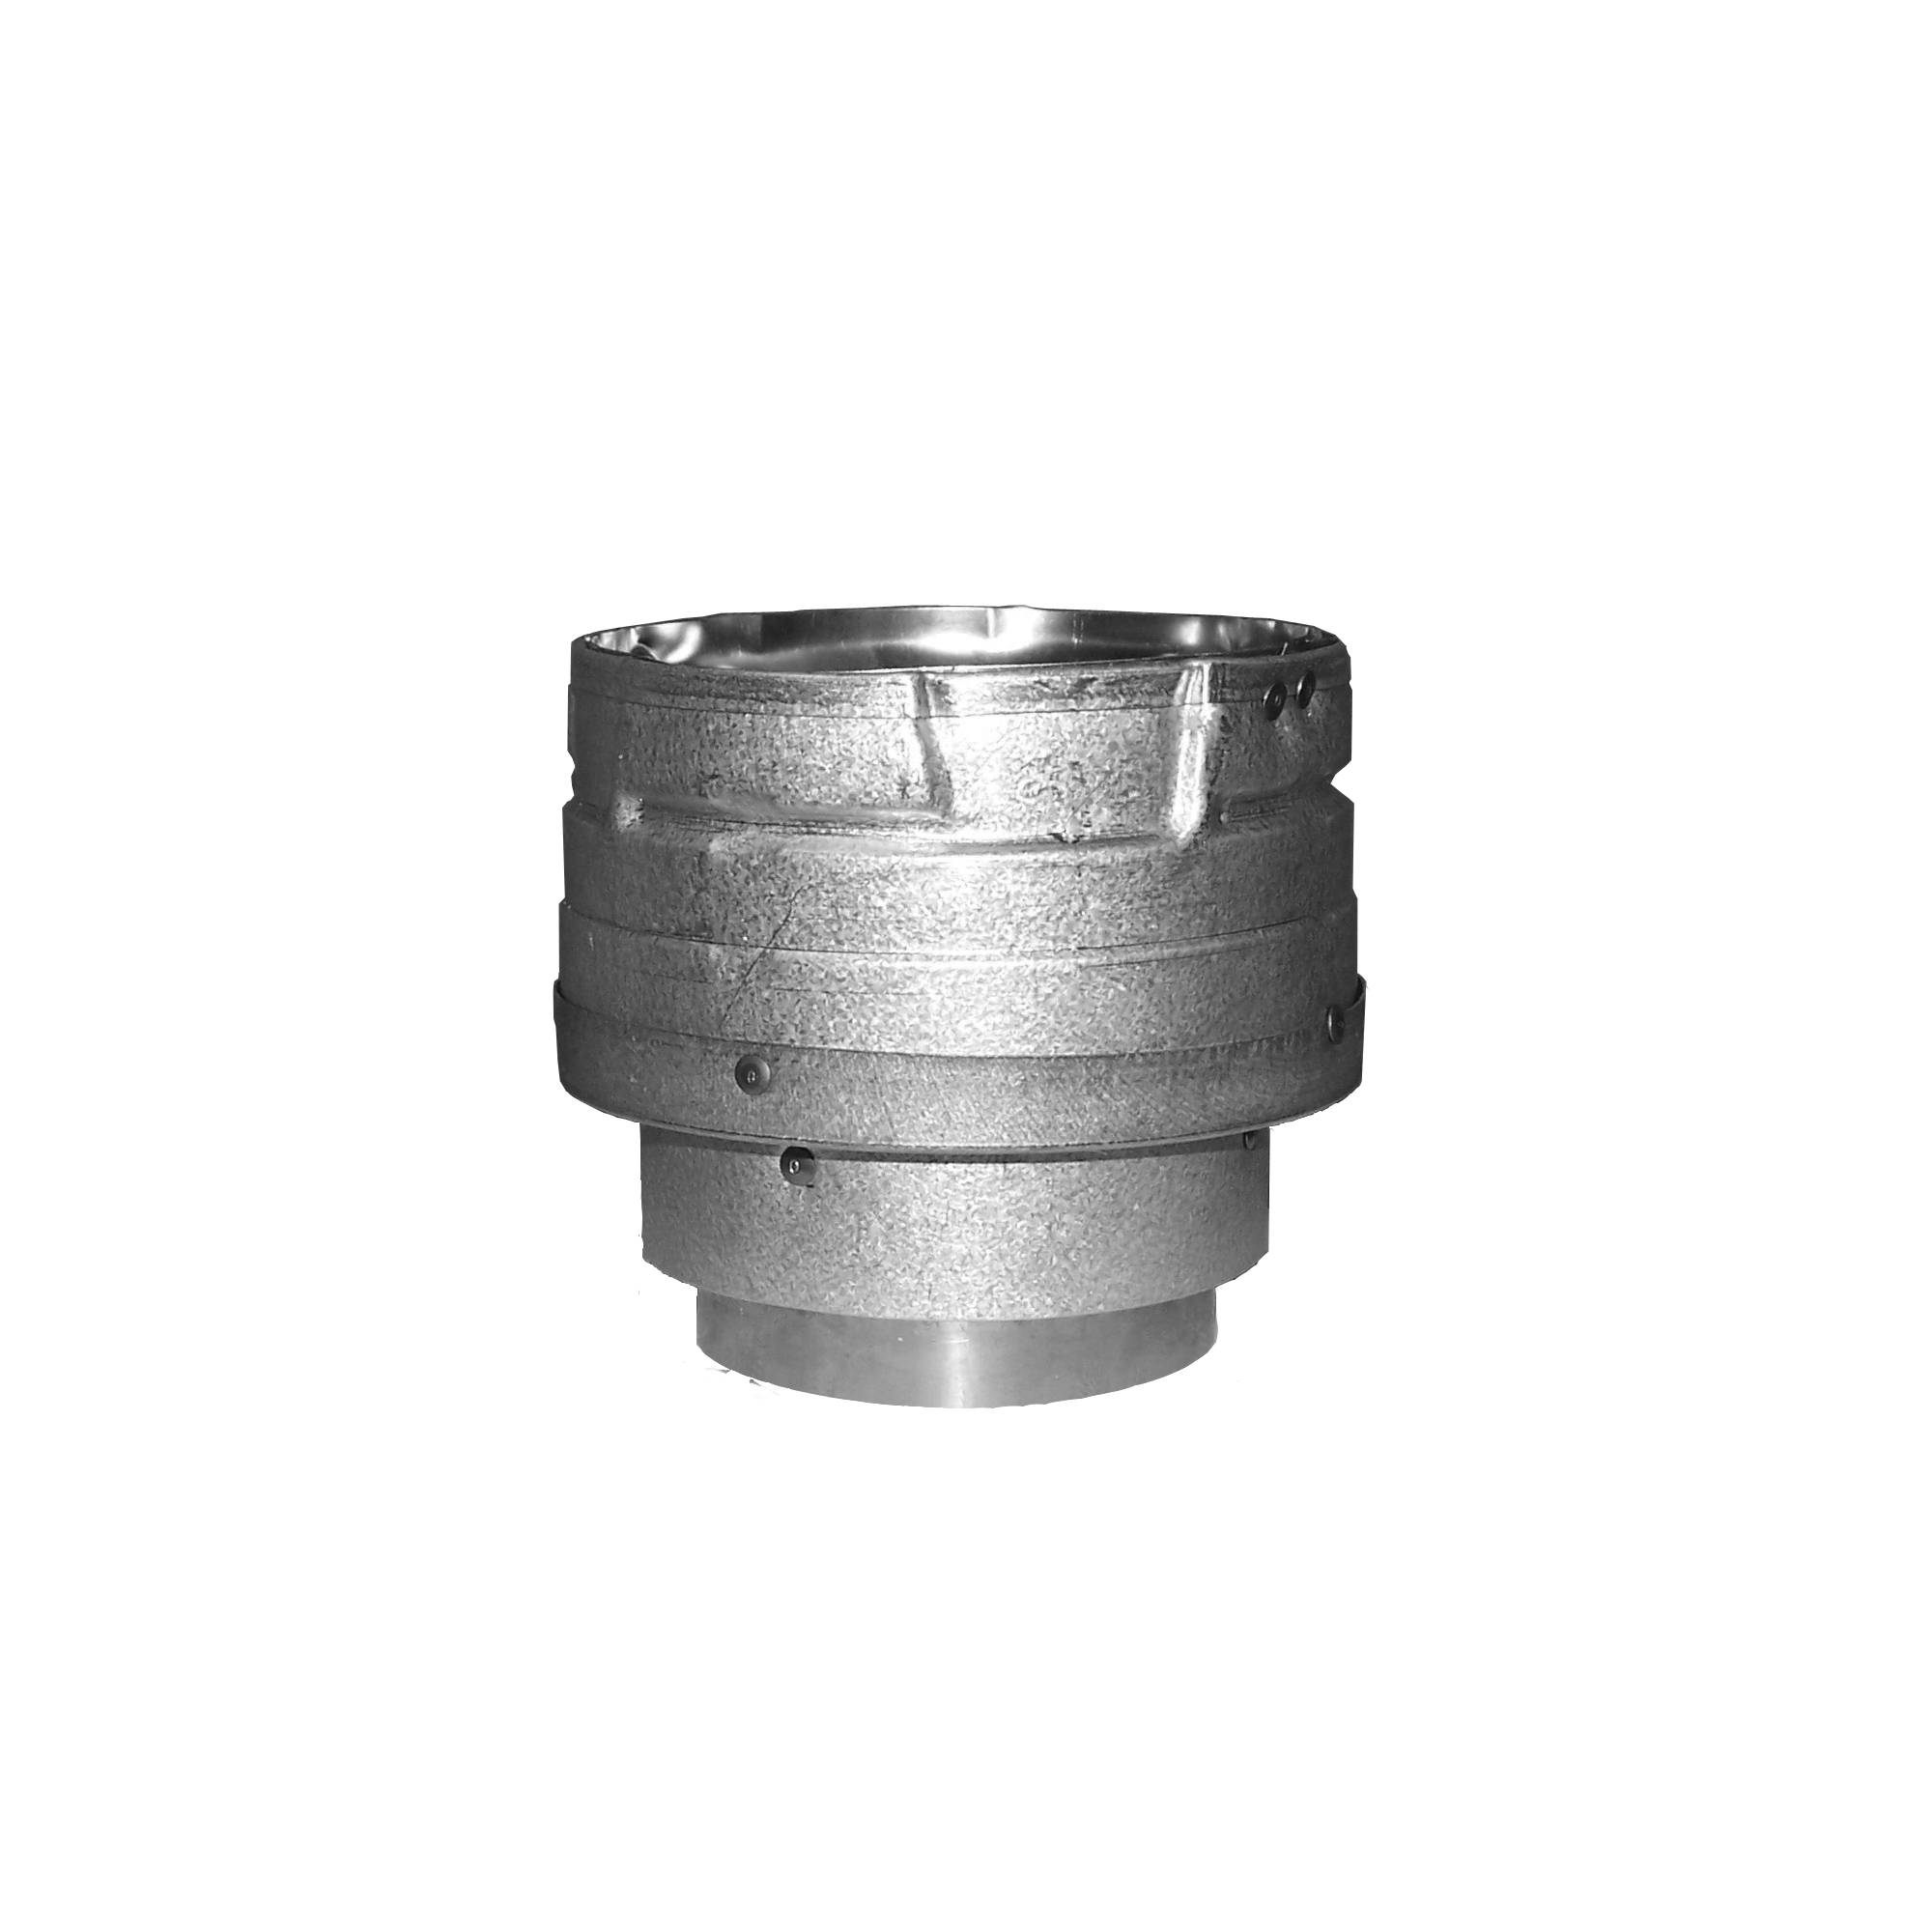 DuraVent, 3Inch Diameter Stove Adapter Increaser, Included (qty.) 6 Material Galvanized Steel, Model 3PVL-X4AD